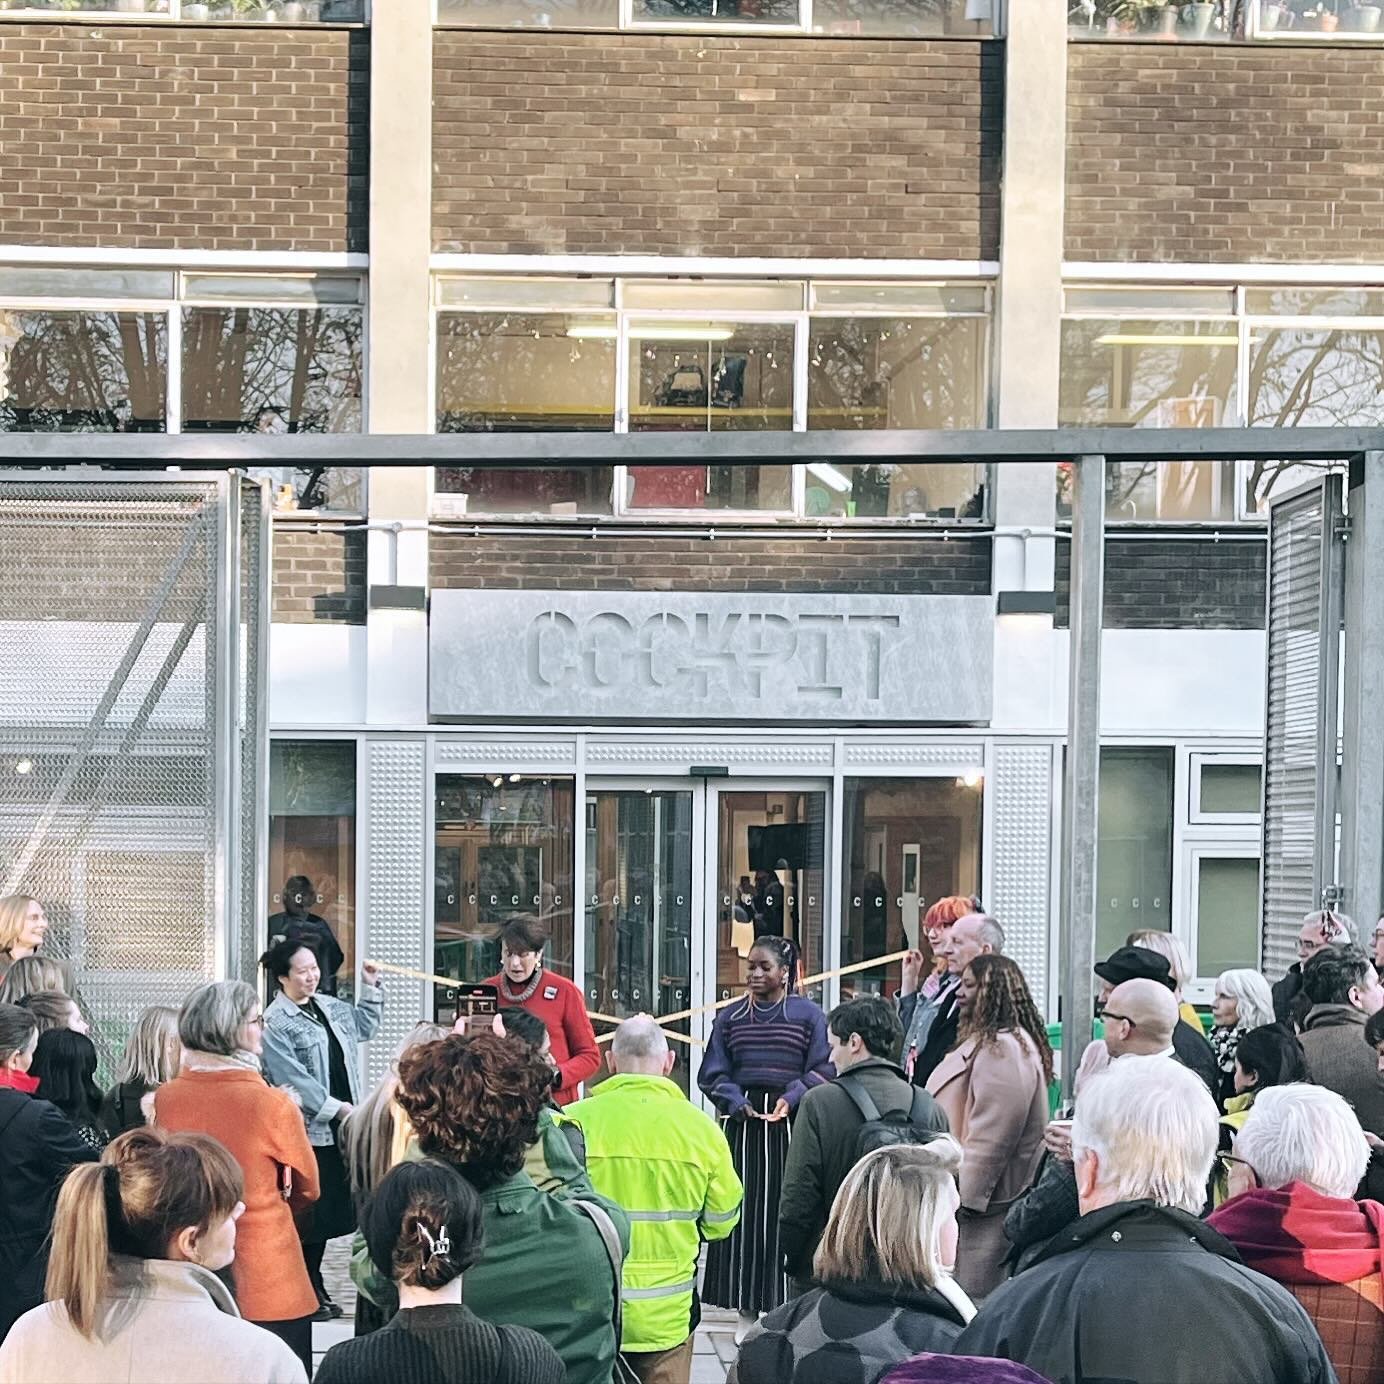 The sun shone this afternoon for the new Cockpit Deptford building opening.

Here's to the next 21 years&mdash;a home to the finest craftspeople and skills in the country. The building also houses a new learning centre, open to all who wish to explor